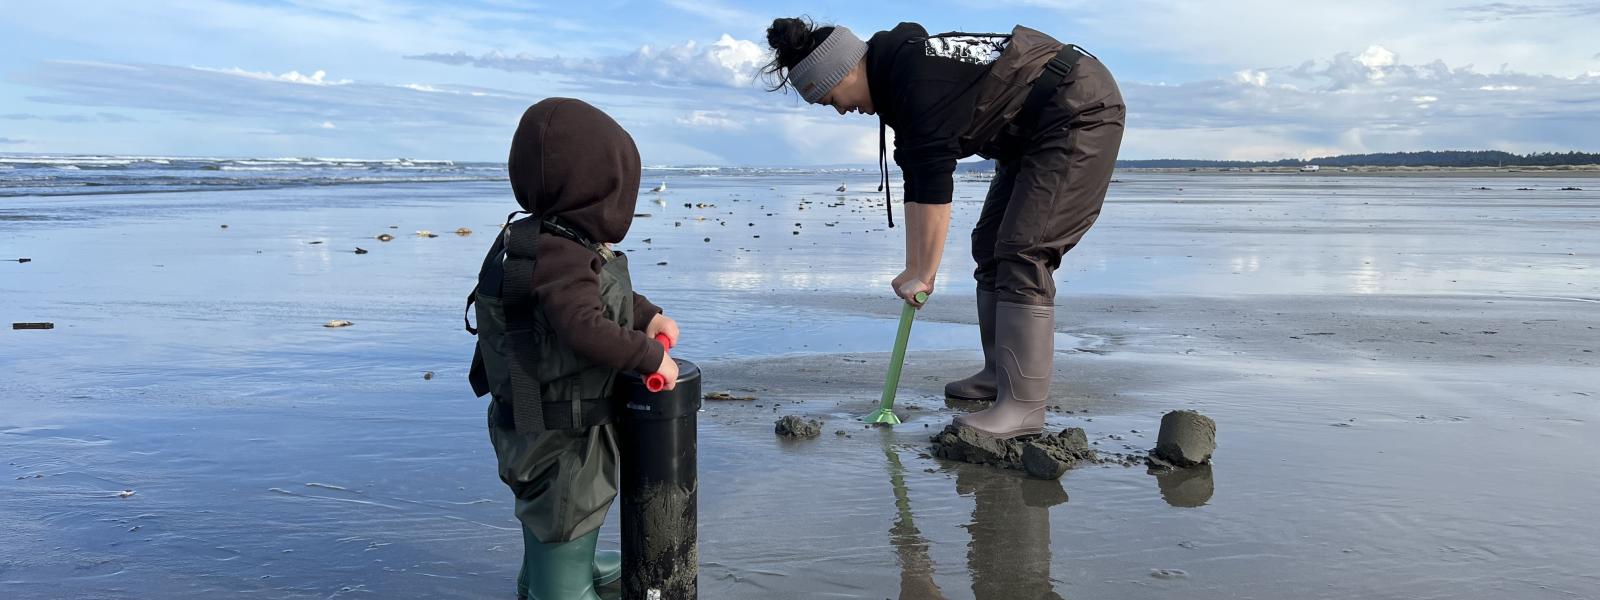 Son razor clam digging with mom